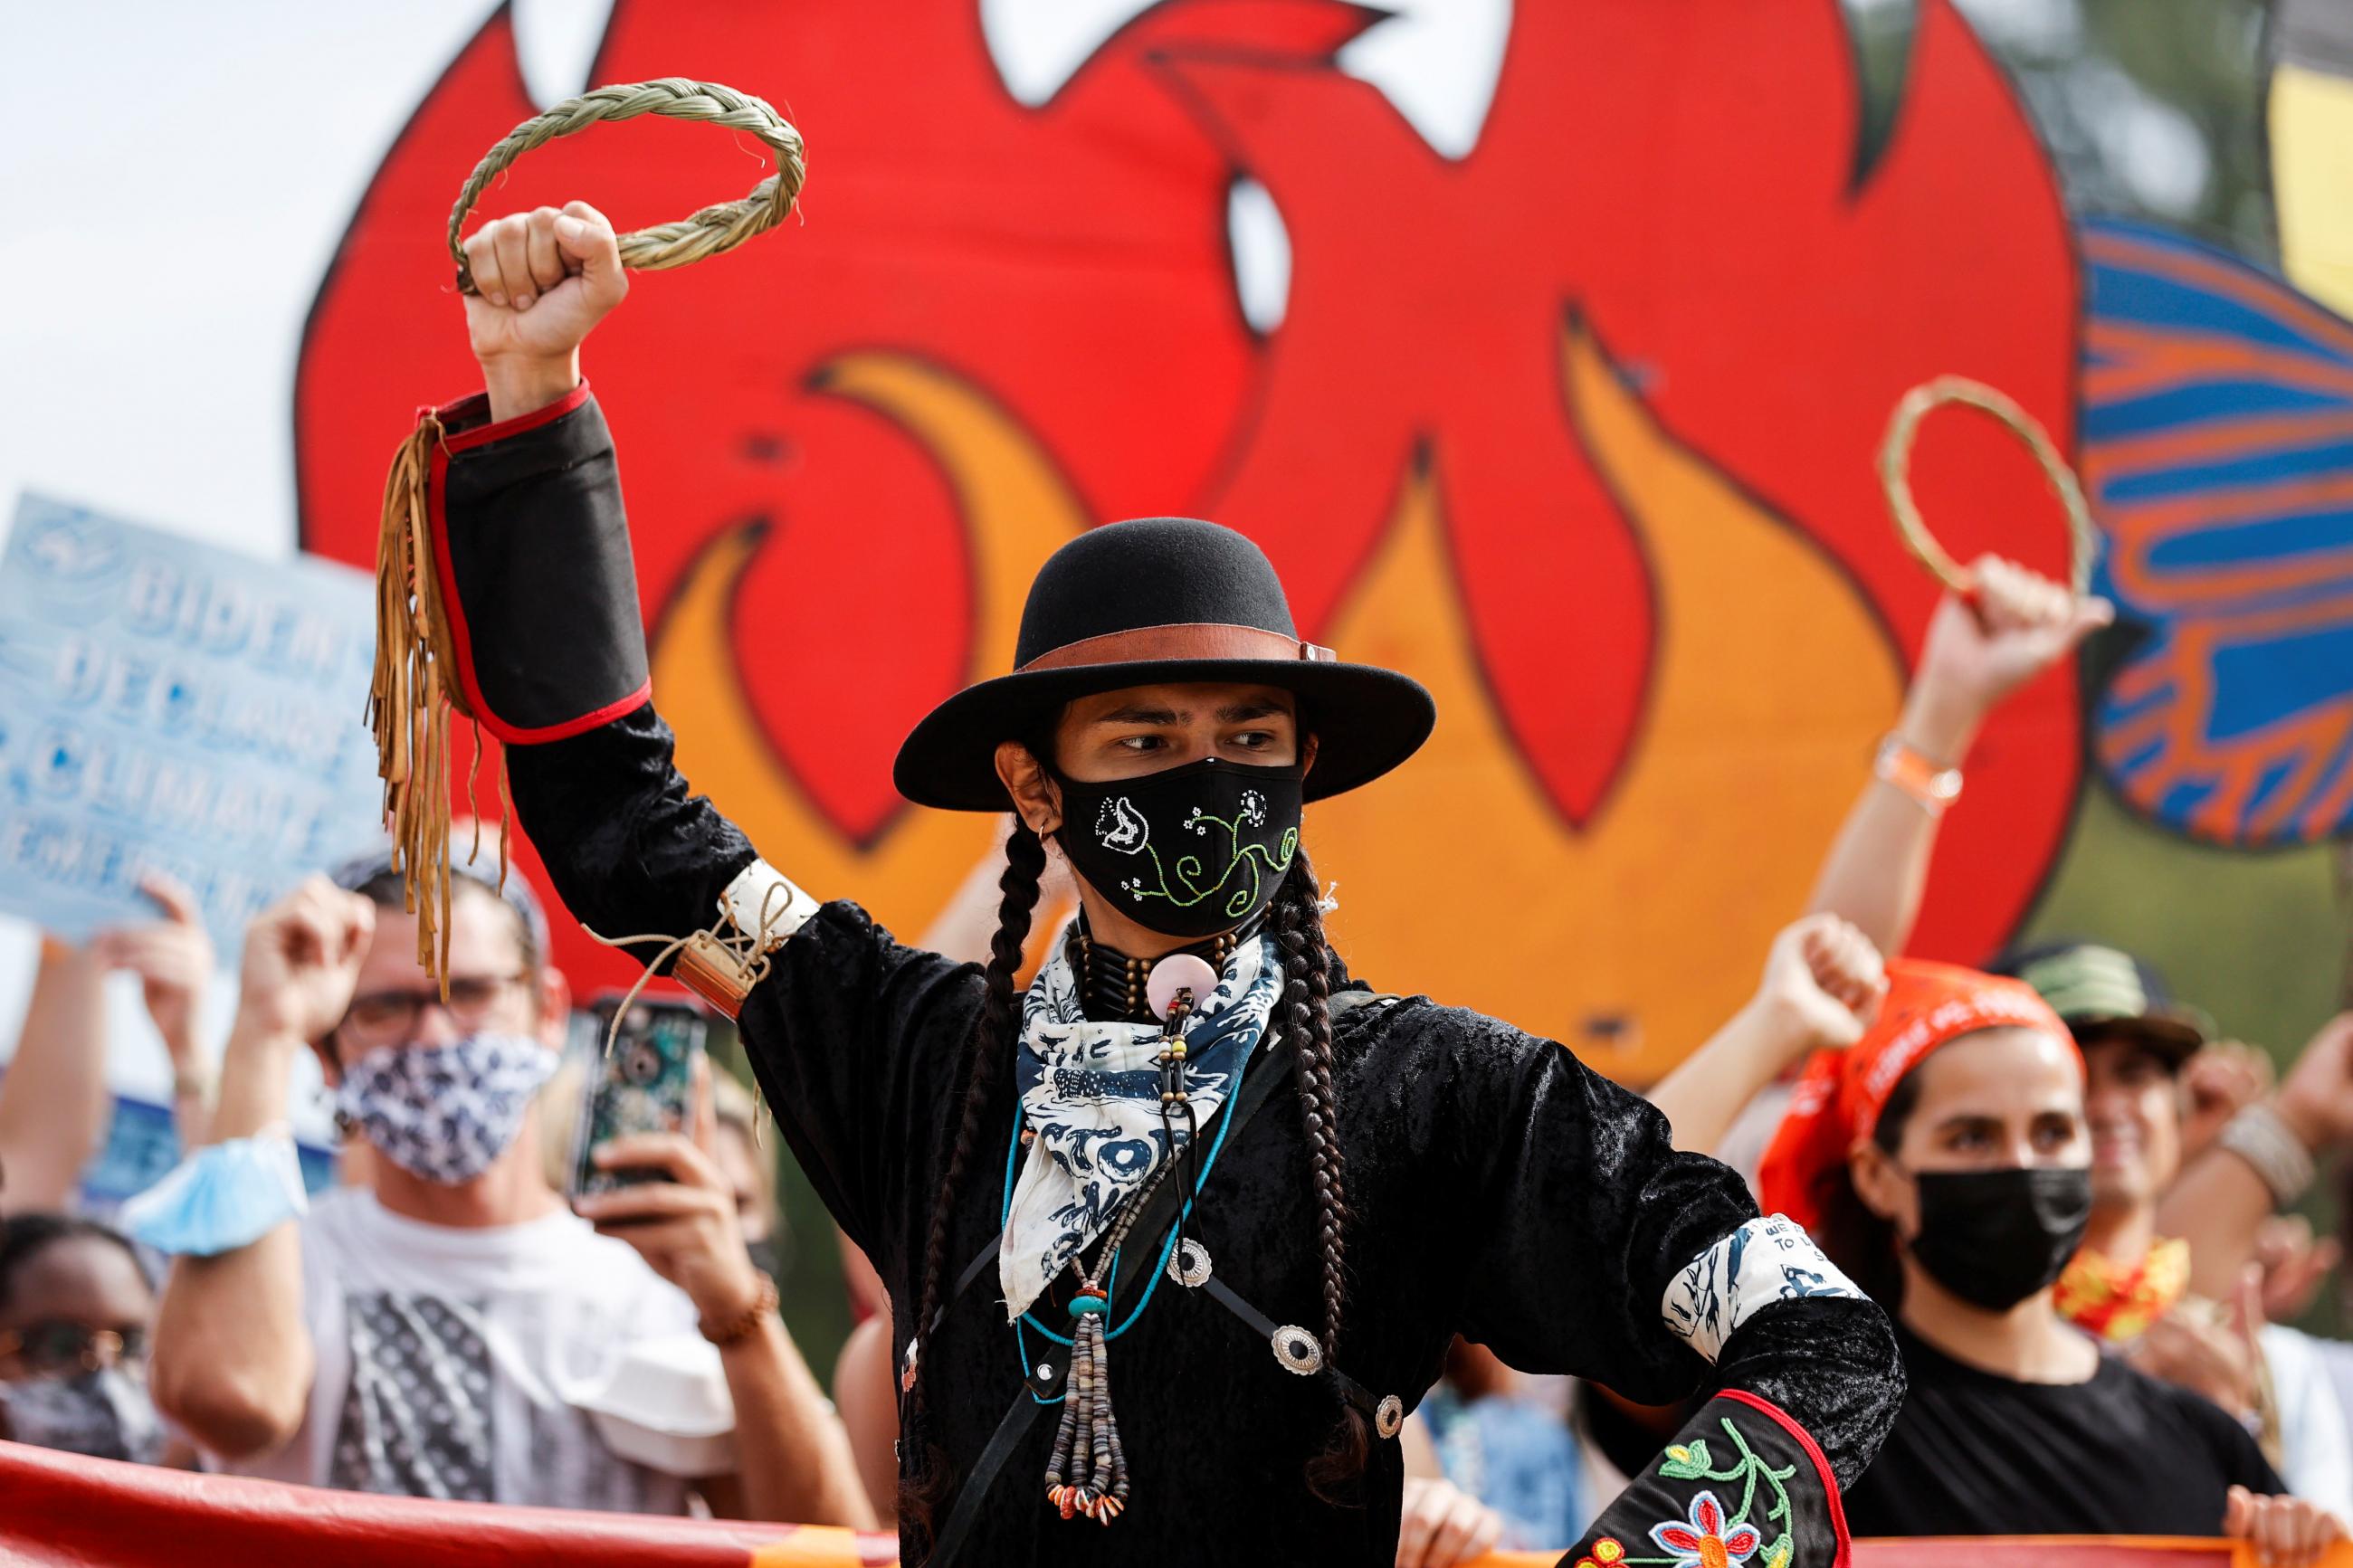 A giant poster of a red and orange flame is seen behind an environmental activist dressed in a black hat and jacket, who is lifting his arm in the air and carrying a braided corn husk, at a climate change protest near the U.S. Capitol in Washington, D.C., on October 15, 2021. 